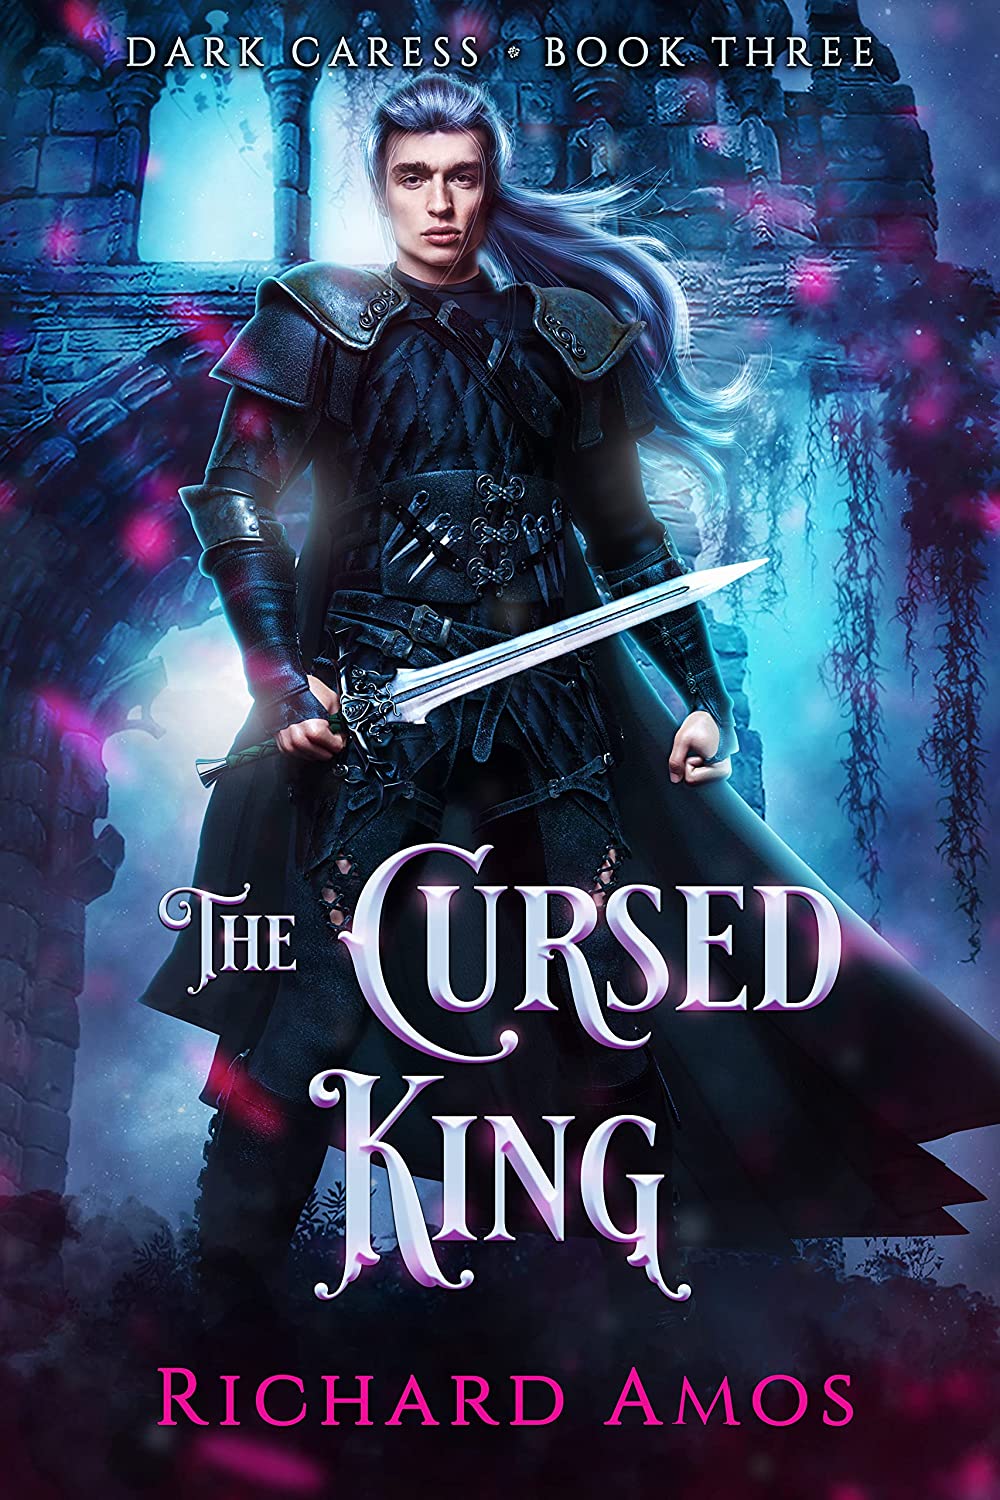 The Cursed King by Richard Amos PDF Download